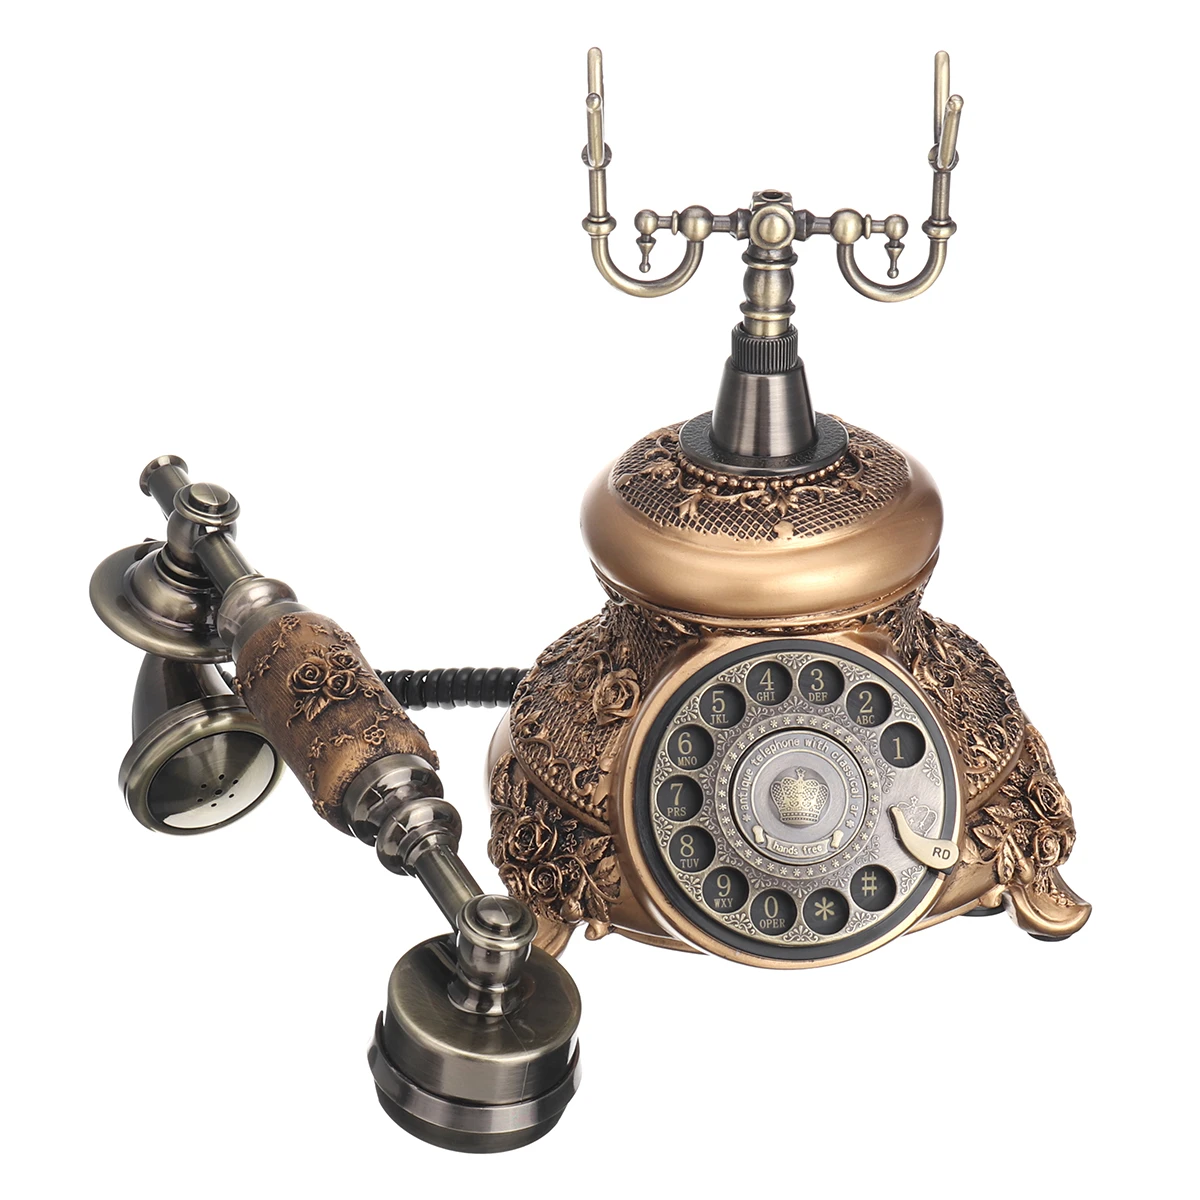 Find Vintage Antique Phone Old Fashioned Golden Corded Retro Handset Telephone Office for Sale on Gipsybee.com